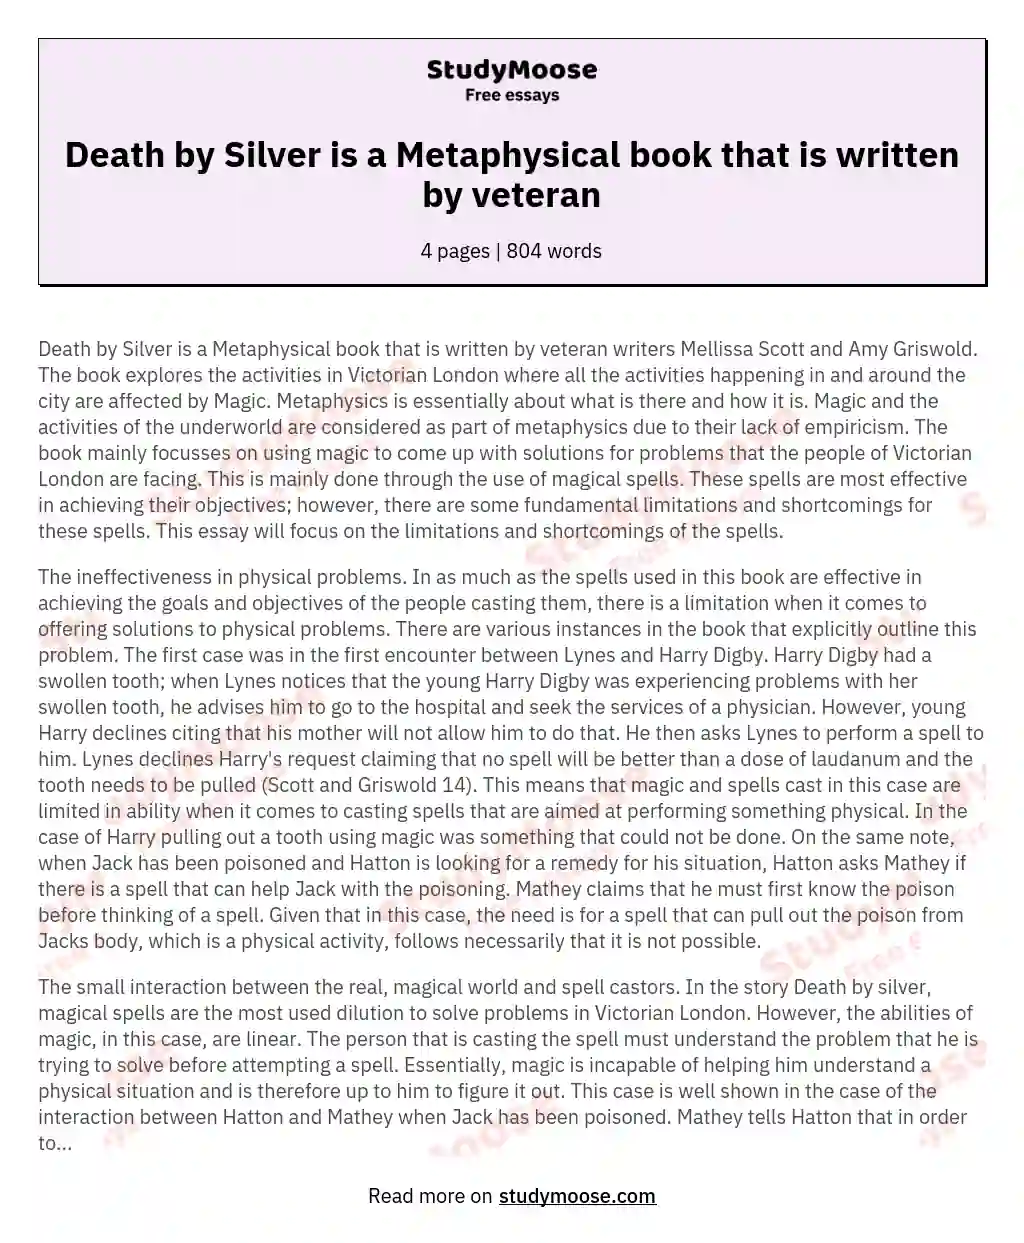 Death by Silver is a Metaphysical book that is written by veteran essay